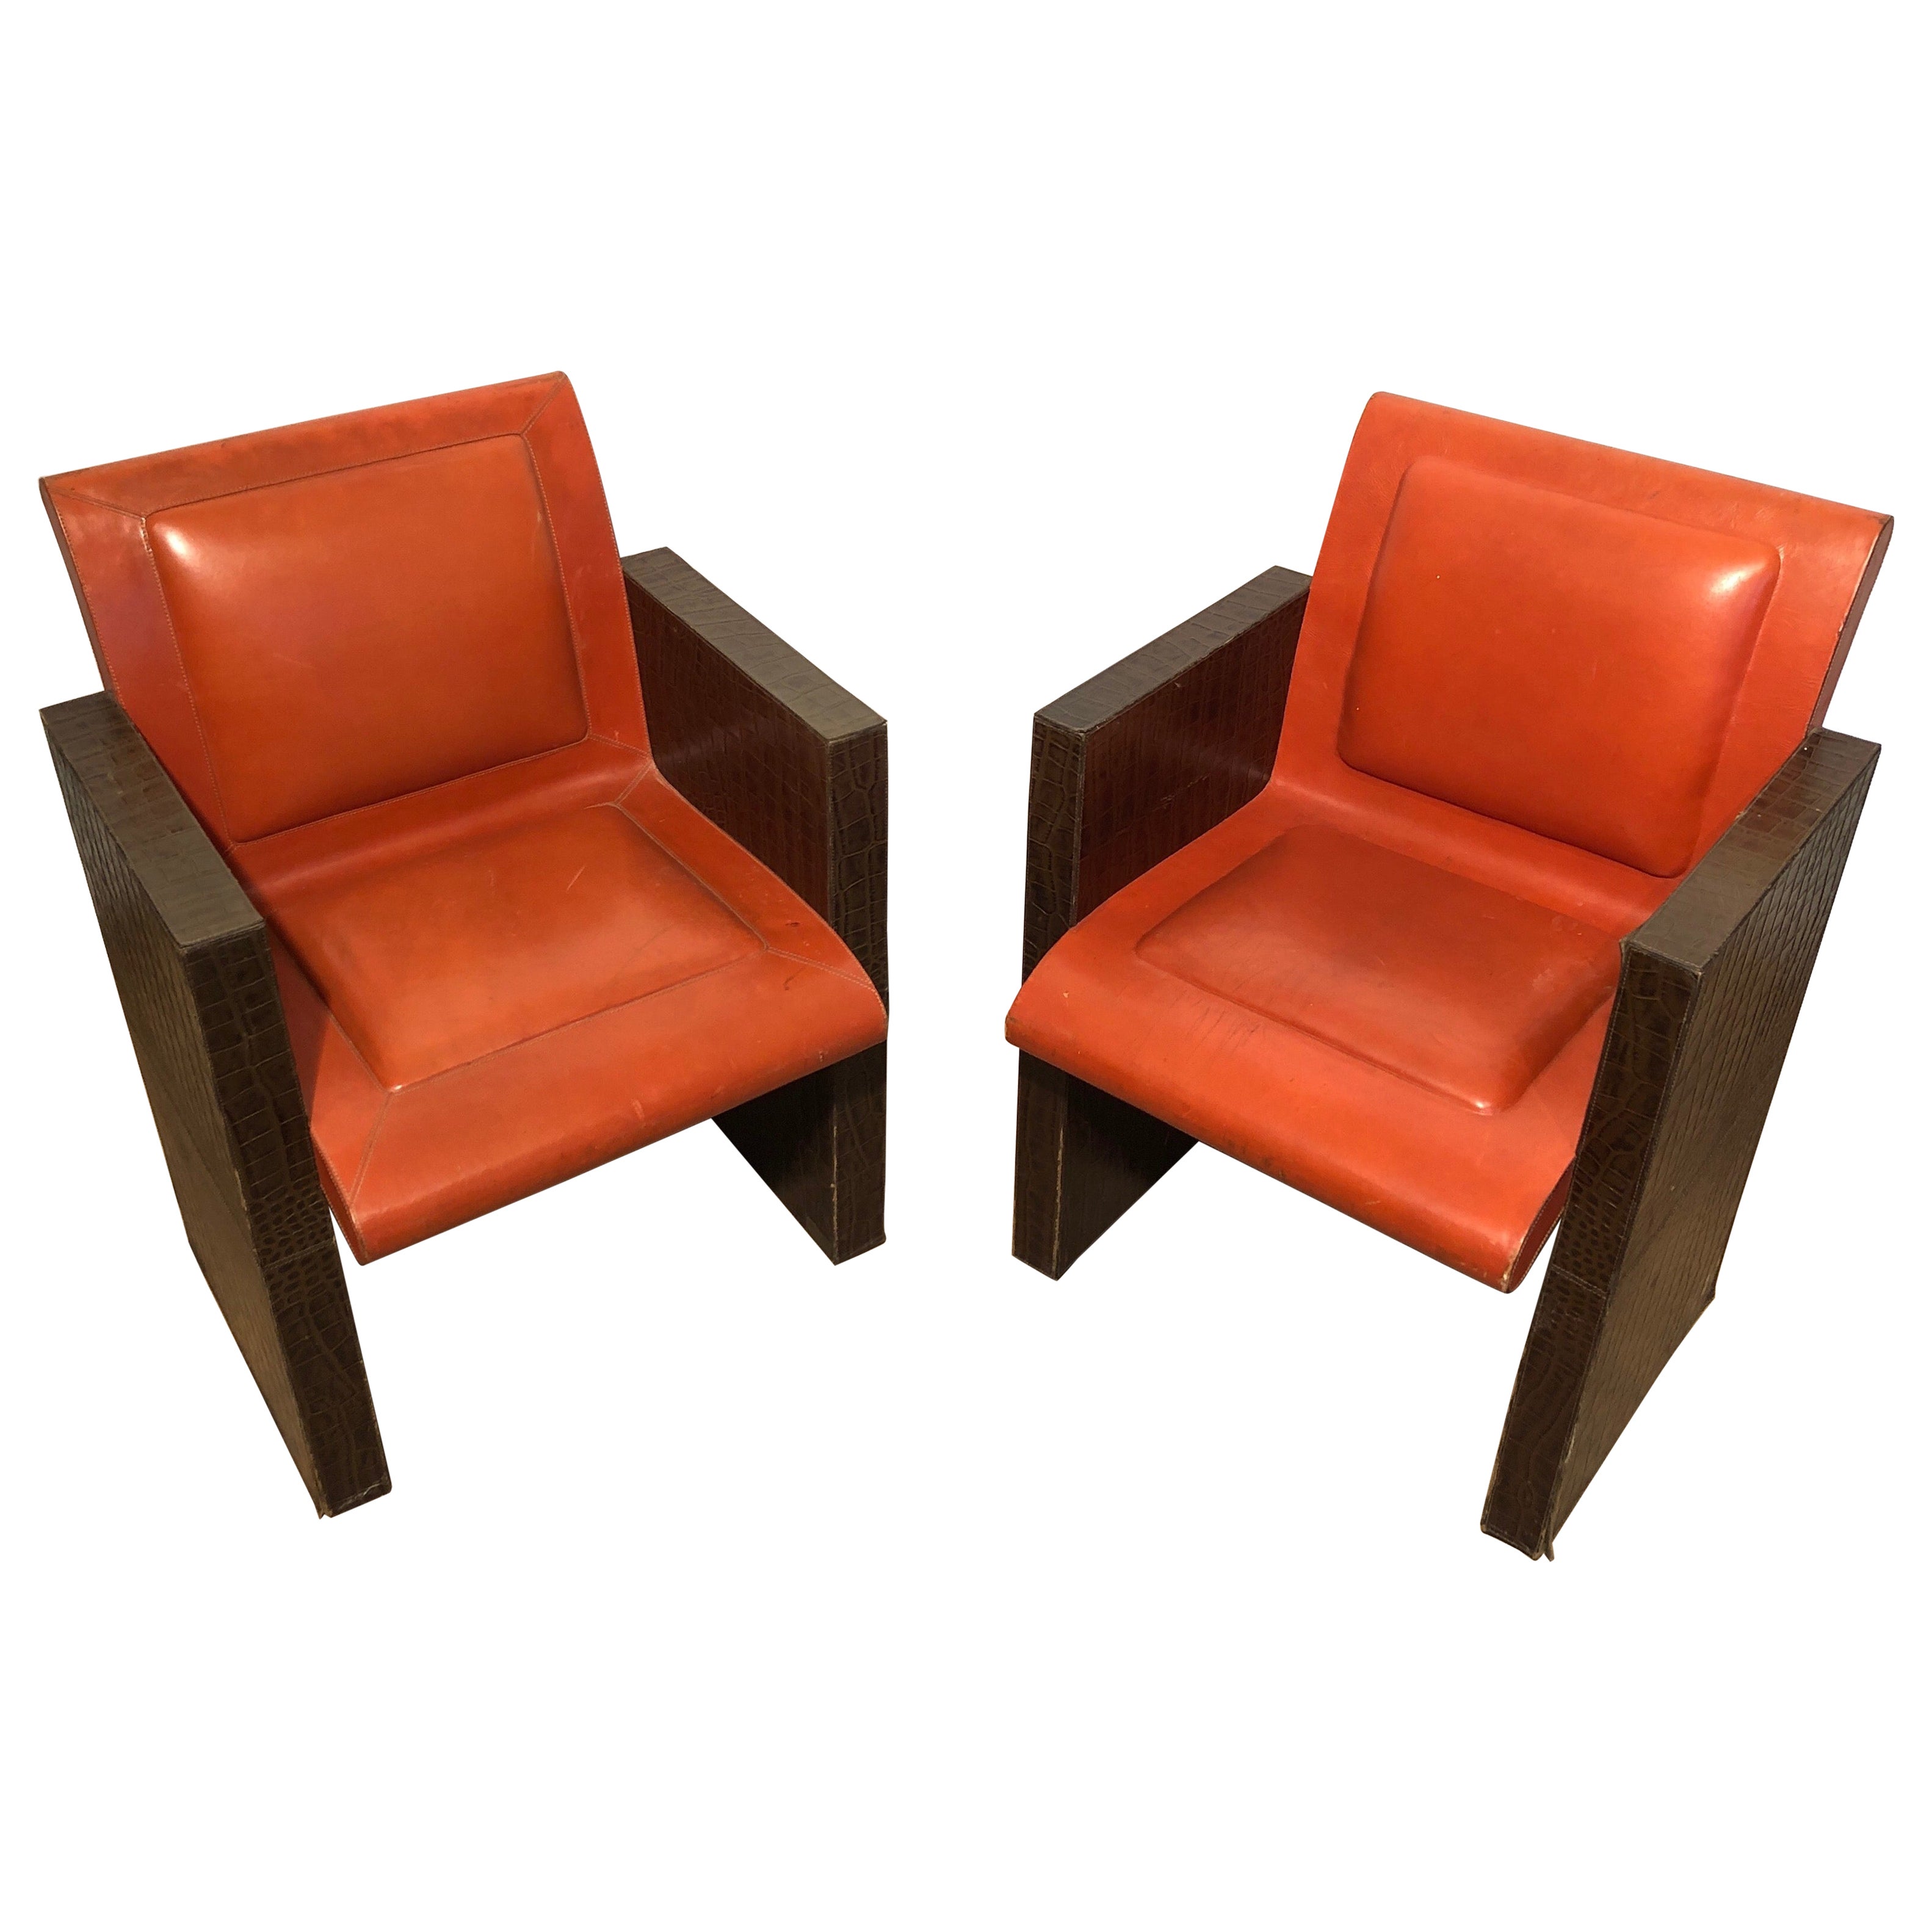 Pair of orangeish and brown leather armchairs (Can be sold individually).  For Sale